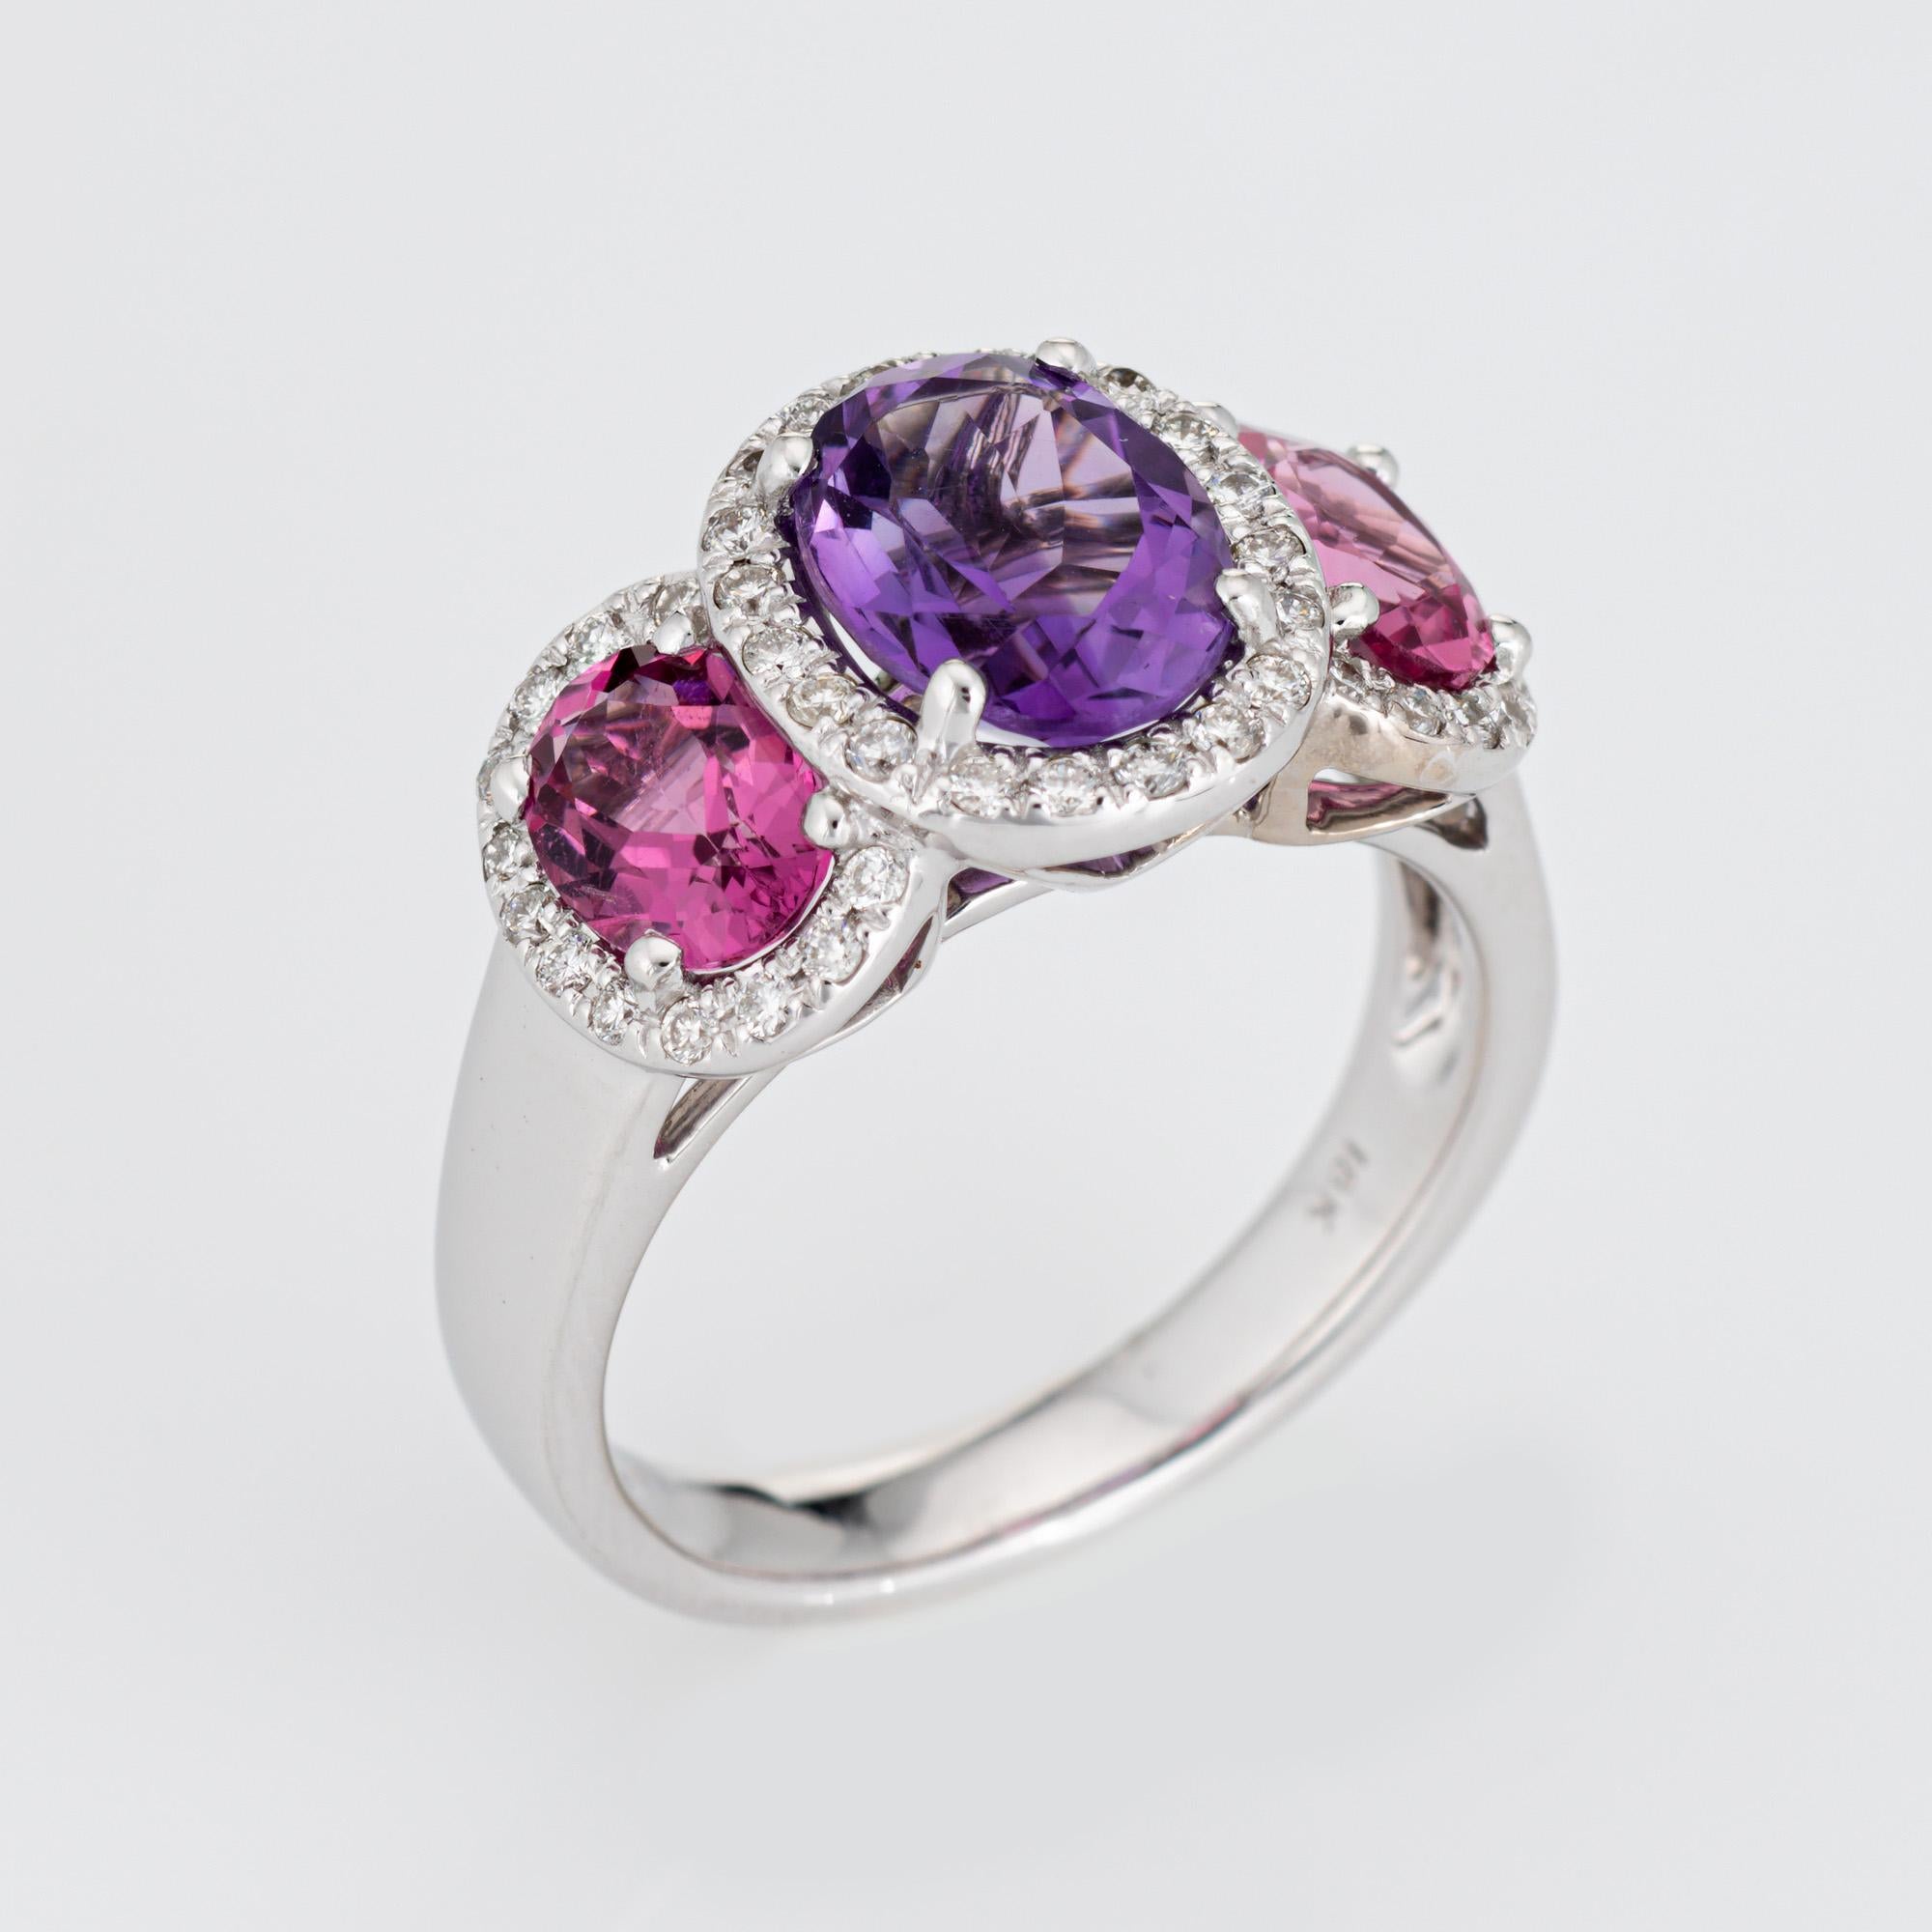 Stylish amethyst & pink tourmaline diamond trilogy ring crafted in 18 karat white gold. 

Oval faceted amethyst measures 9mm x 7mm (estimated at 2 carats), accented with two pink tourmalines measuring 7mm x 5mm (estimated at 1 carat each - 2 carats